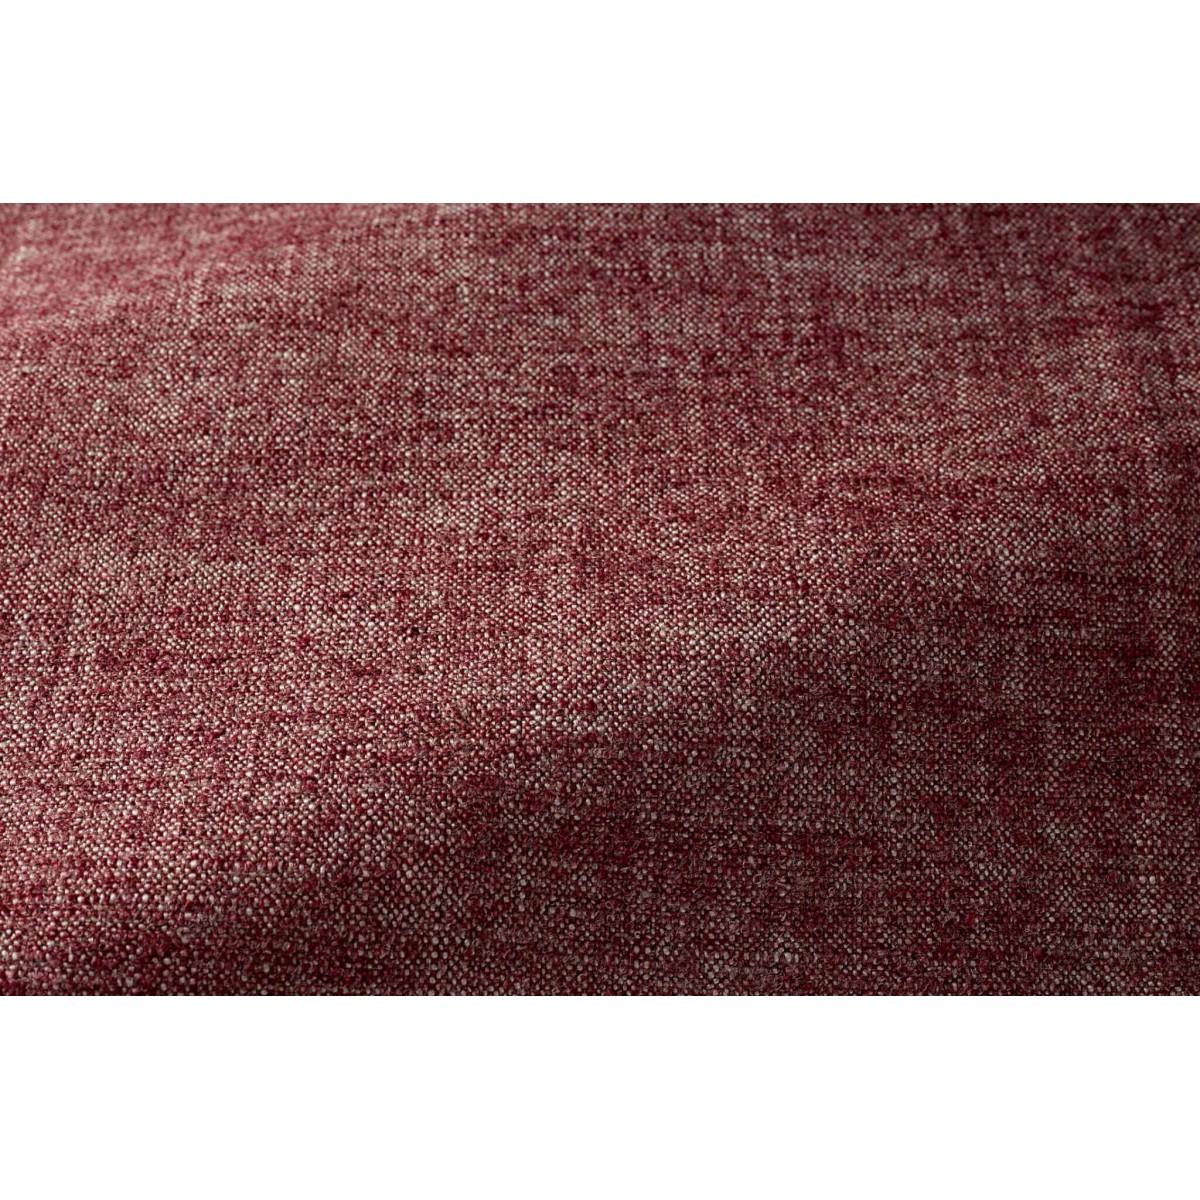 Popus Editions Giovanna 2.5 Seater Sofa in Sangria London Linen Fabric

Giovanna is a sofa with a strong profile. A sober, plush line, with this famous detail that changes everything, so as not to forget its strength of character and this charming